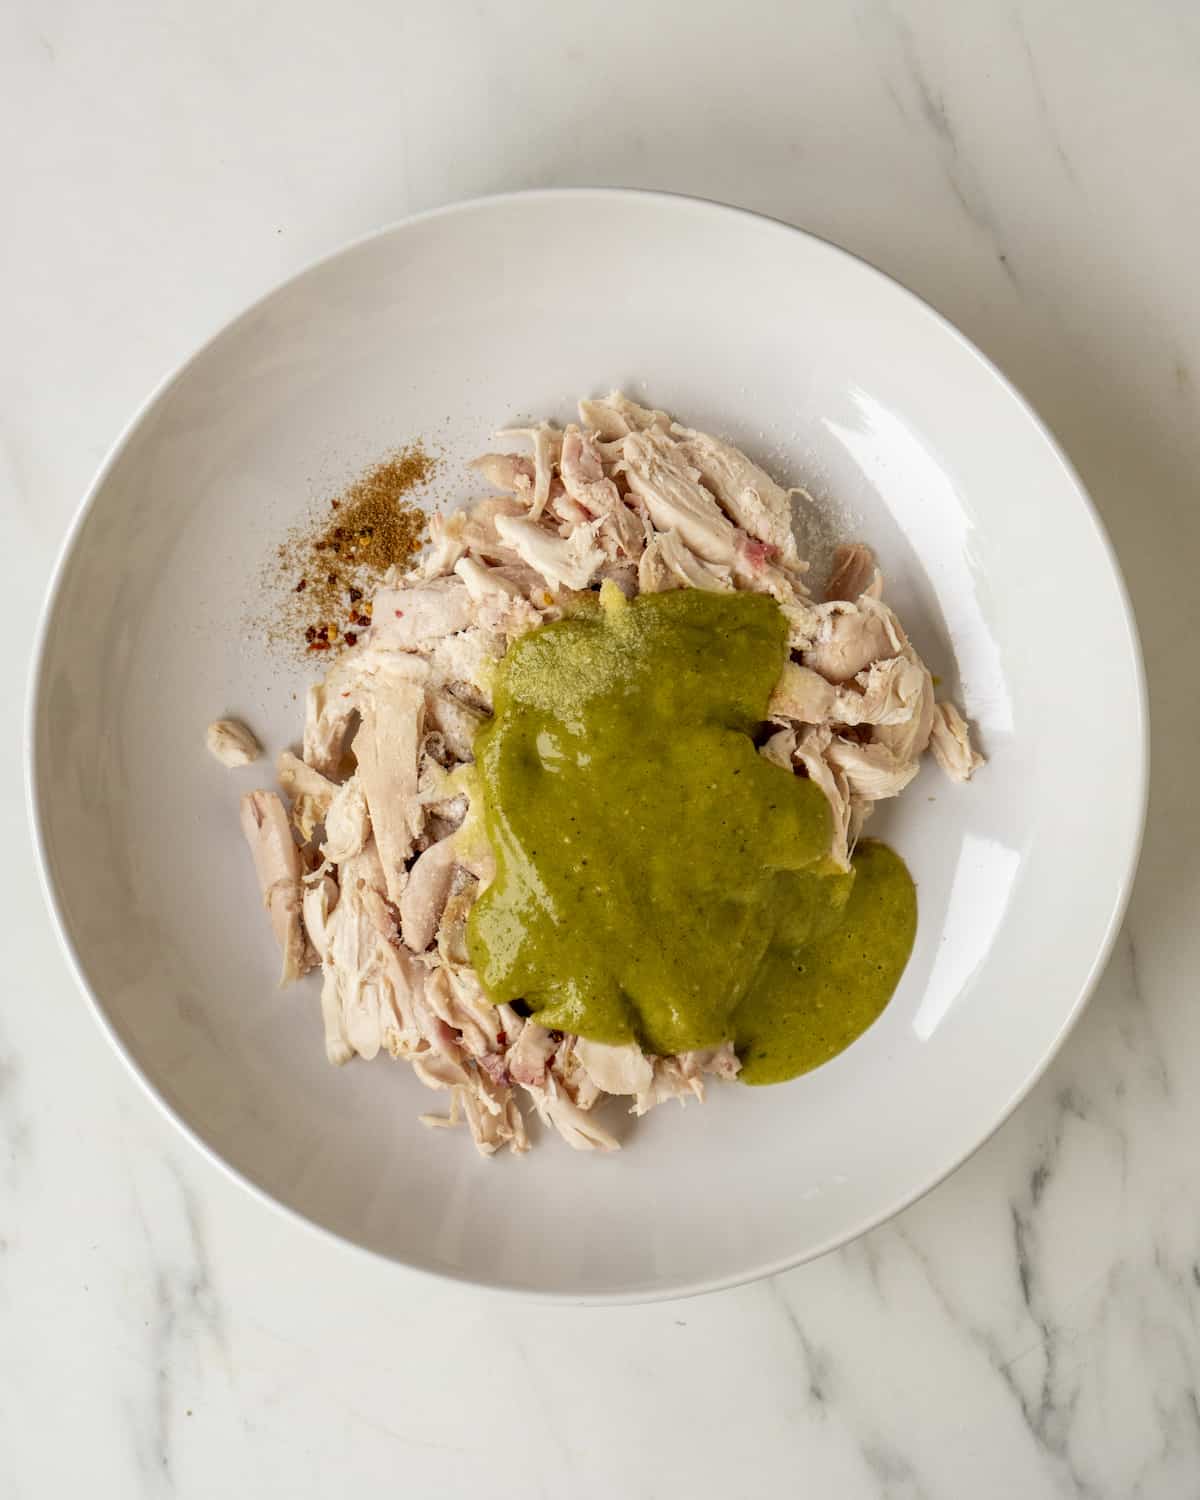 Rotisserie chicken ,coriander and red pepper flakes sitting in a white bowl covered with the green enchilada sauce.  